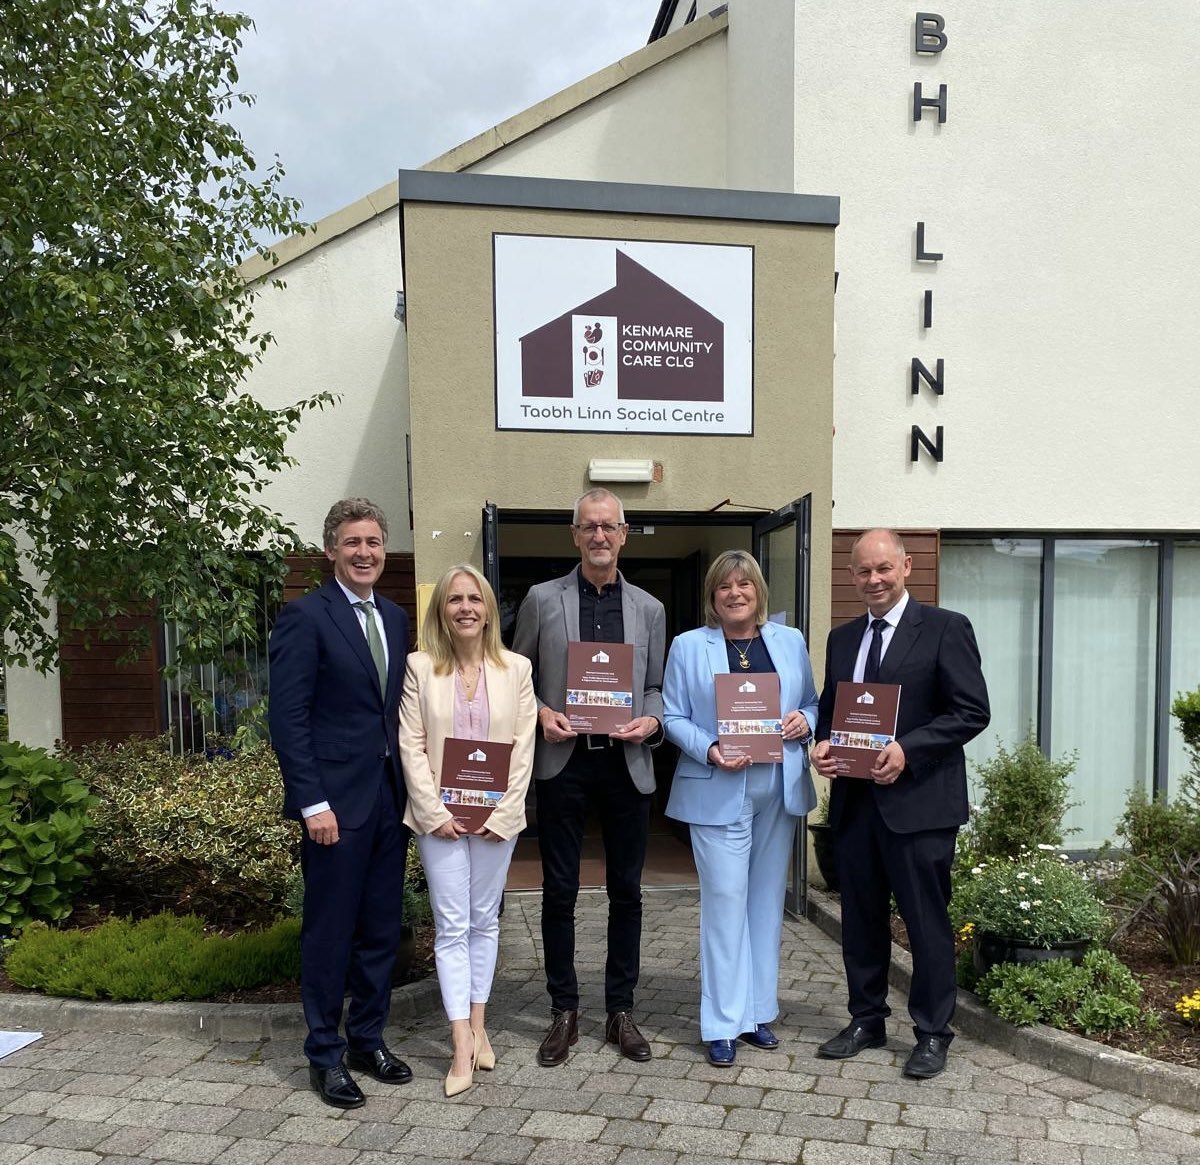 Launching “Kenmare Community Care” Report in Taobh Linn Social Centre. The report examines an aging population, supports available and opportunities for development. Many thanks to Dr Brendan O Keeffe the reports author & John Daly chairperson @SenatorMarkDaly @AgeFriendlyIrl